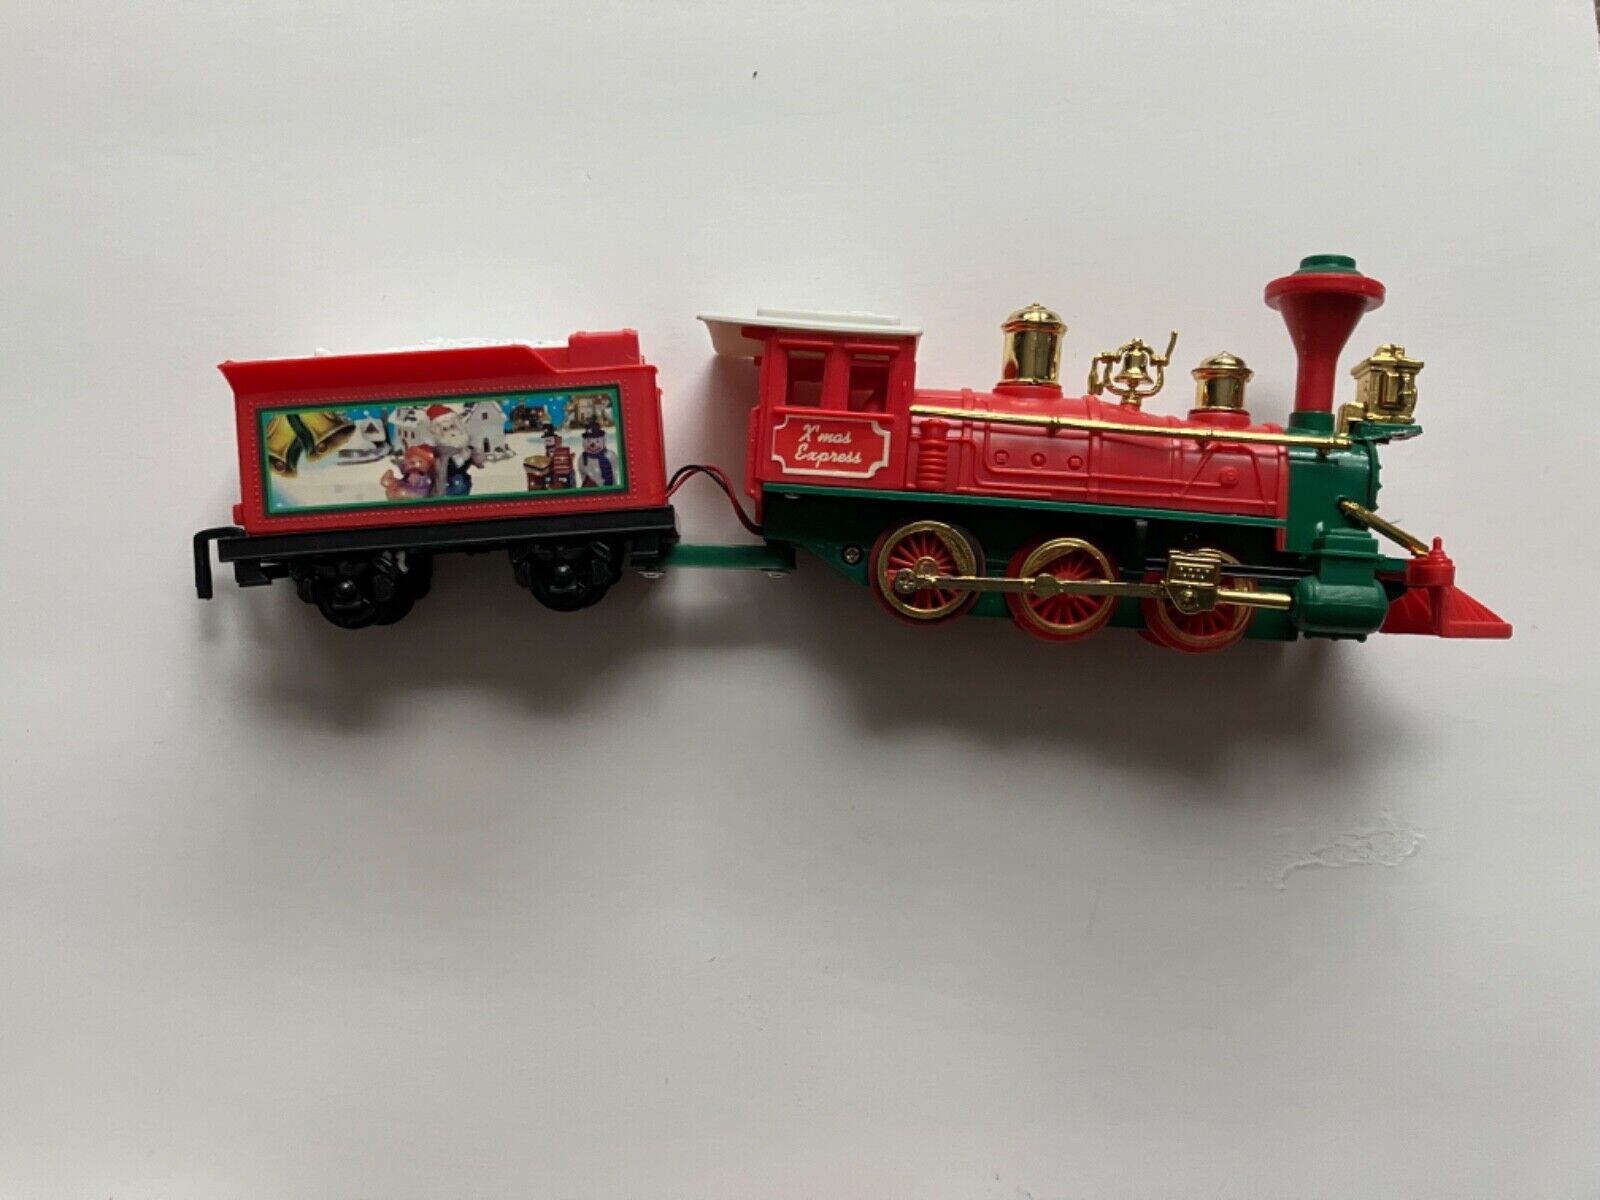 Good Condition Vintage X’mas Express Animated Train Display 1900s